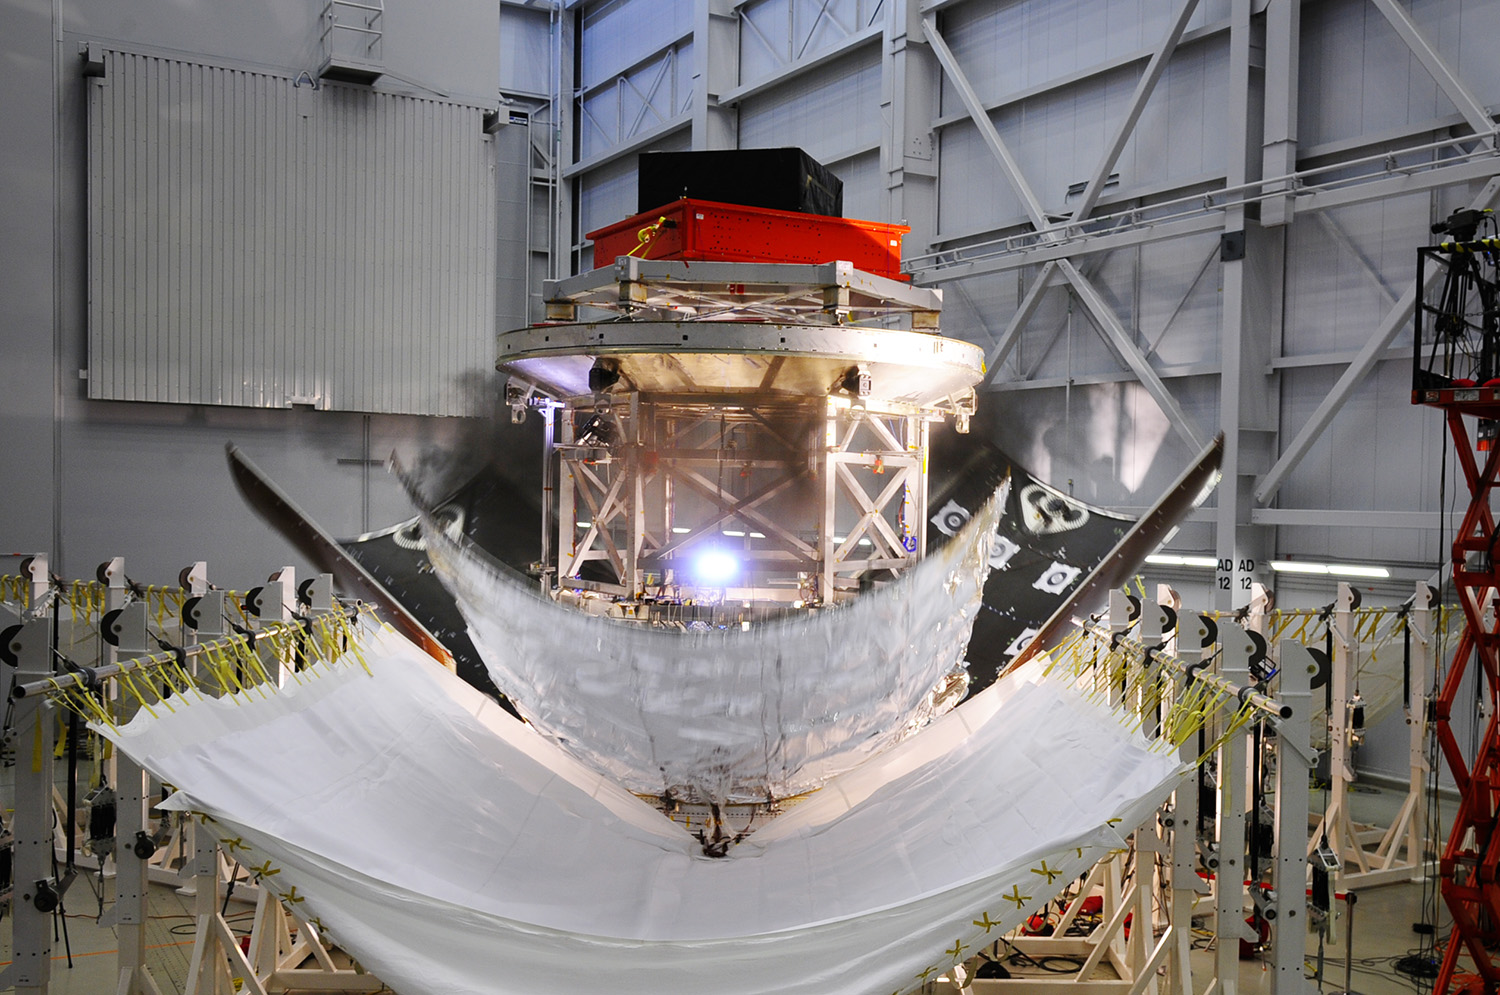 The three panel or fairings encapsulating a stand-in for Orion’s service module successfully detach during a test Nov. 6, 2013 at Lockheed Martin’s facility in Sunnyvale, Calif. Image Credit: Lockheed Martin